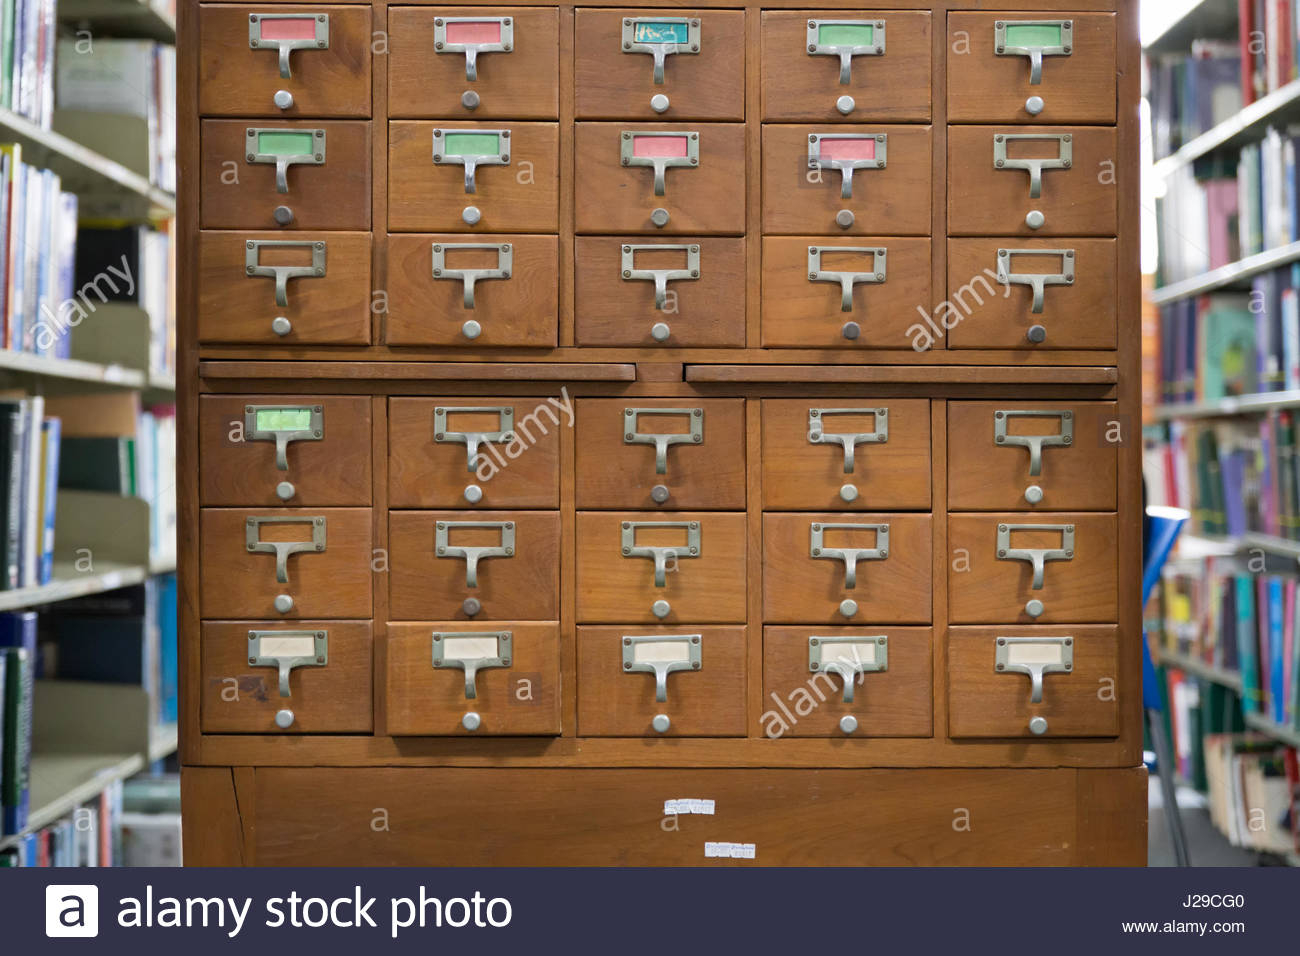 An Old Style Wooden Cabinet Of Library Card Or File Catalog Index within size 1300 X 956